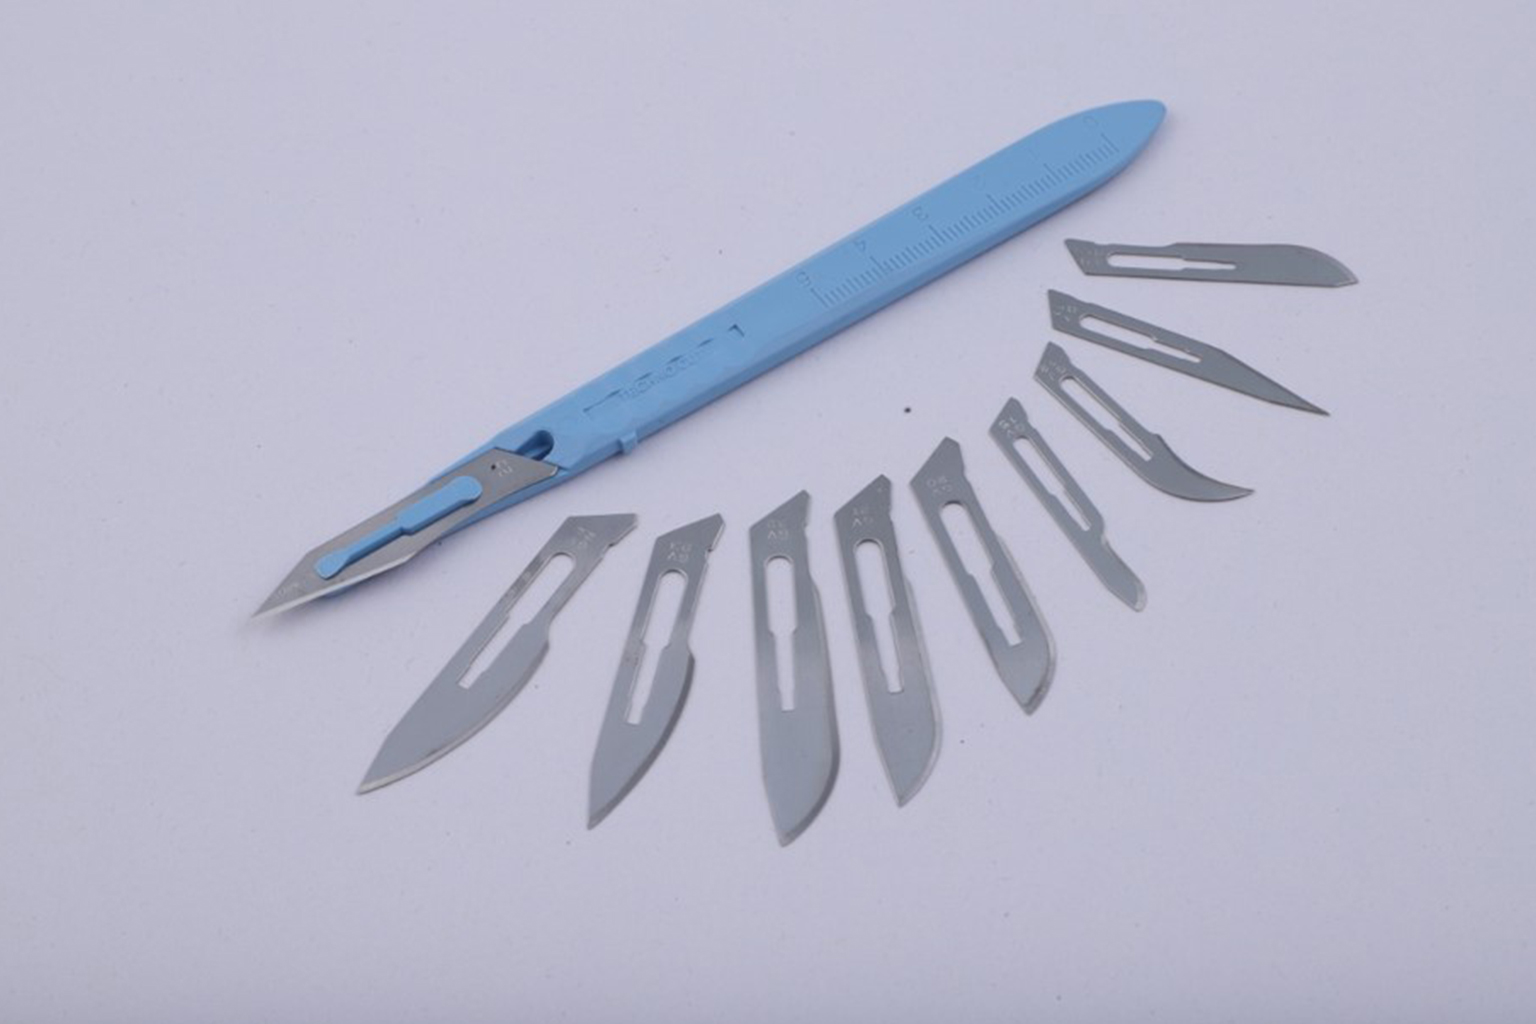 Scalpel Blades Understanding Numbers and Indications